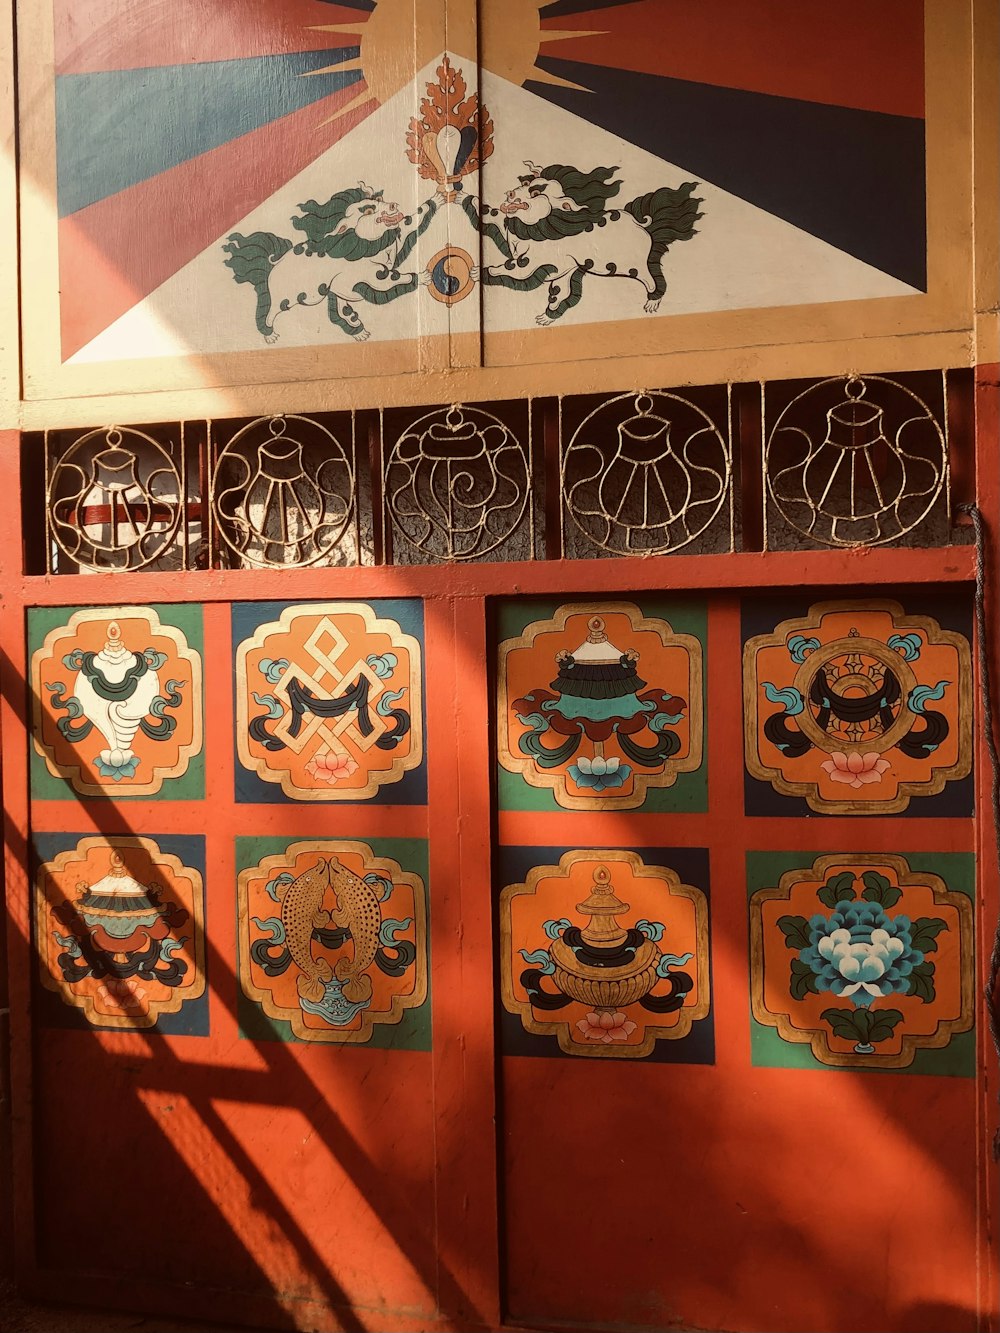 a wooden door with decorative designs painted on it